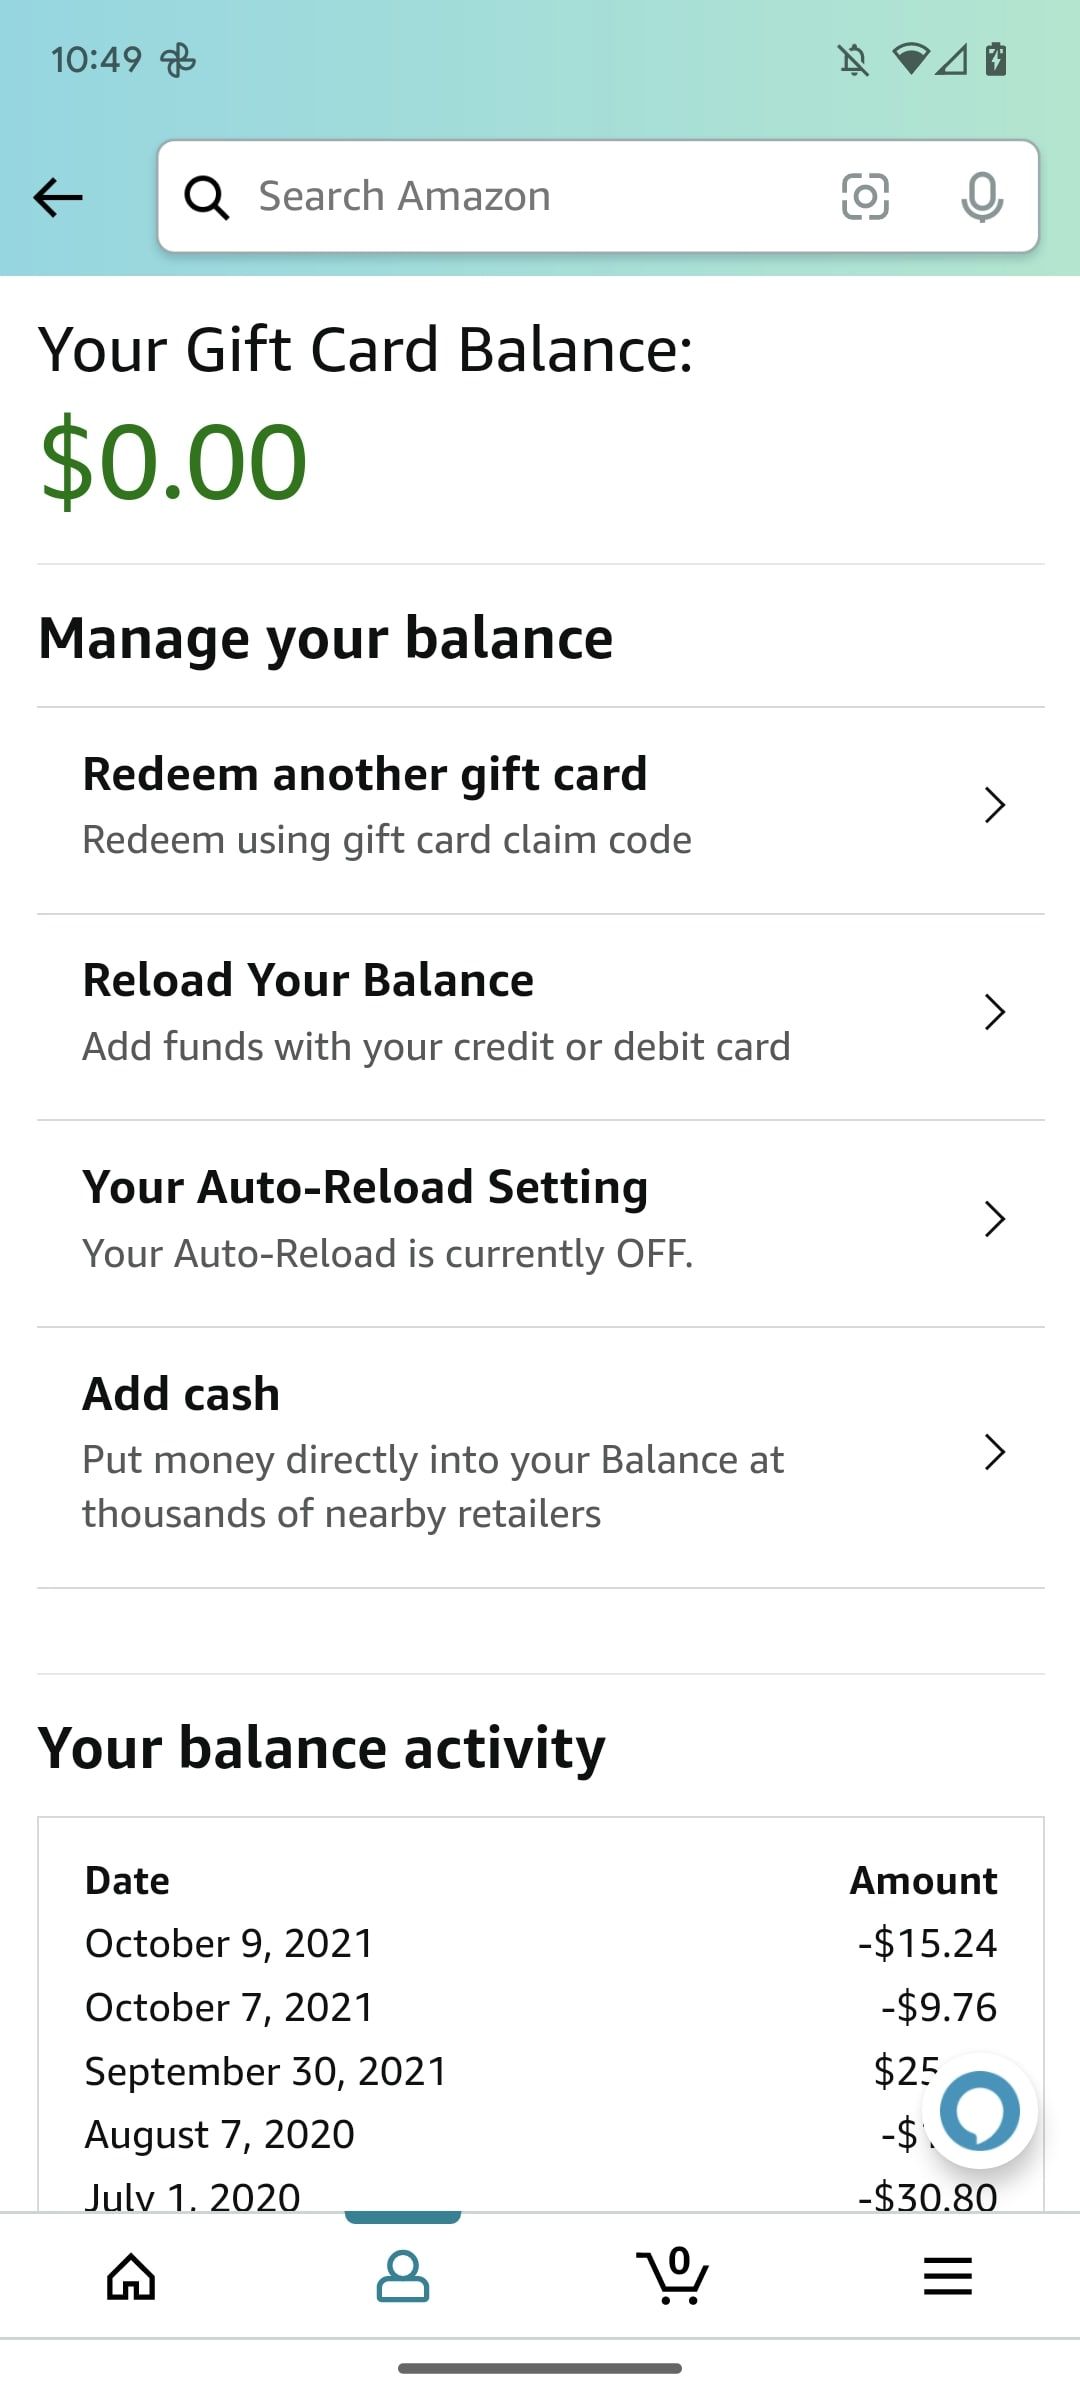 How to Transfer Amazon Gift Card Balance to a Bank Account